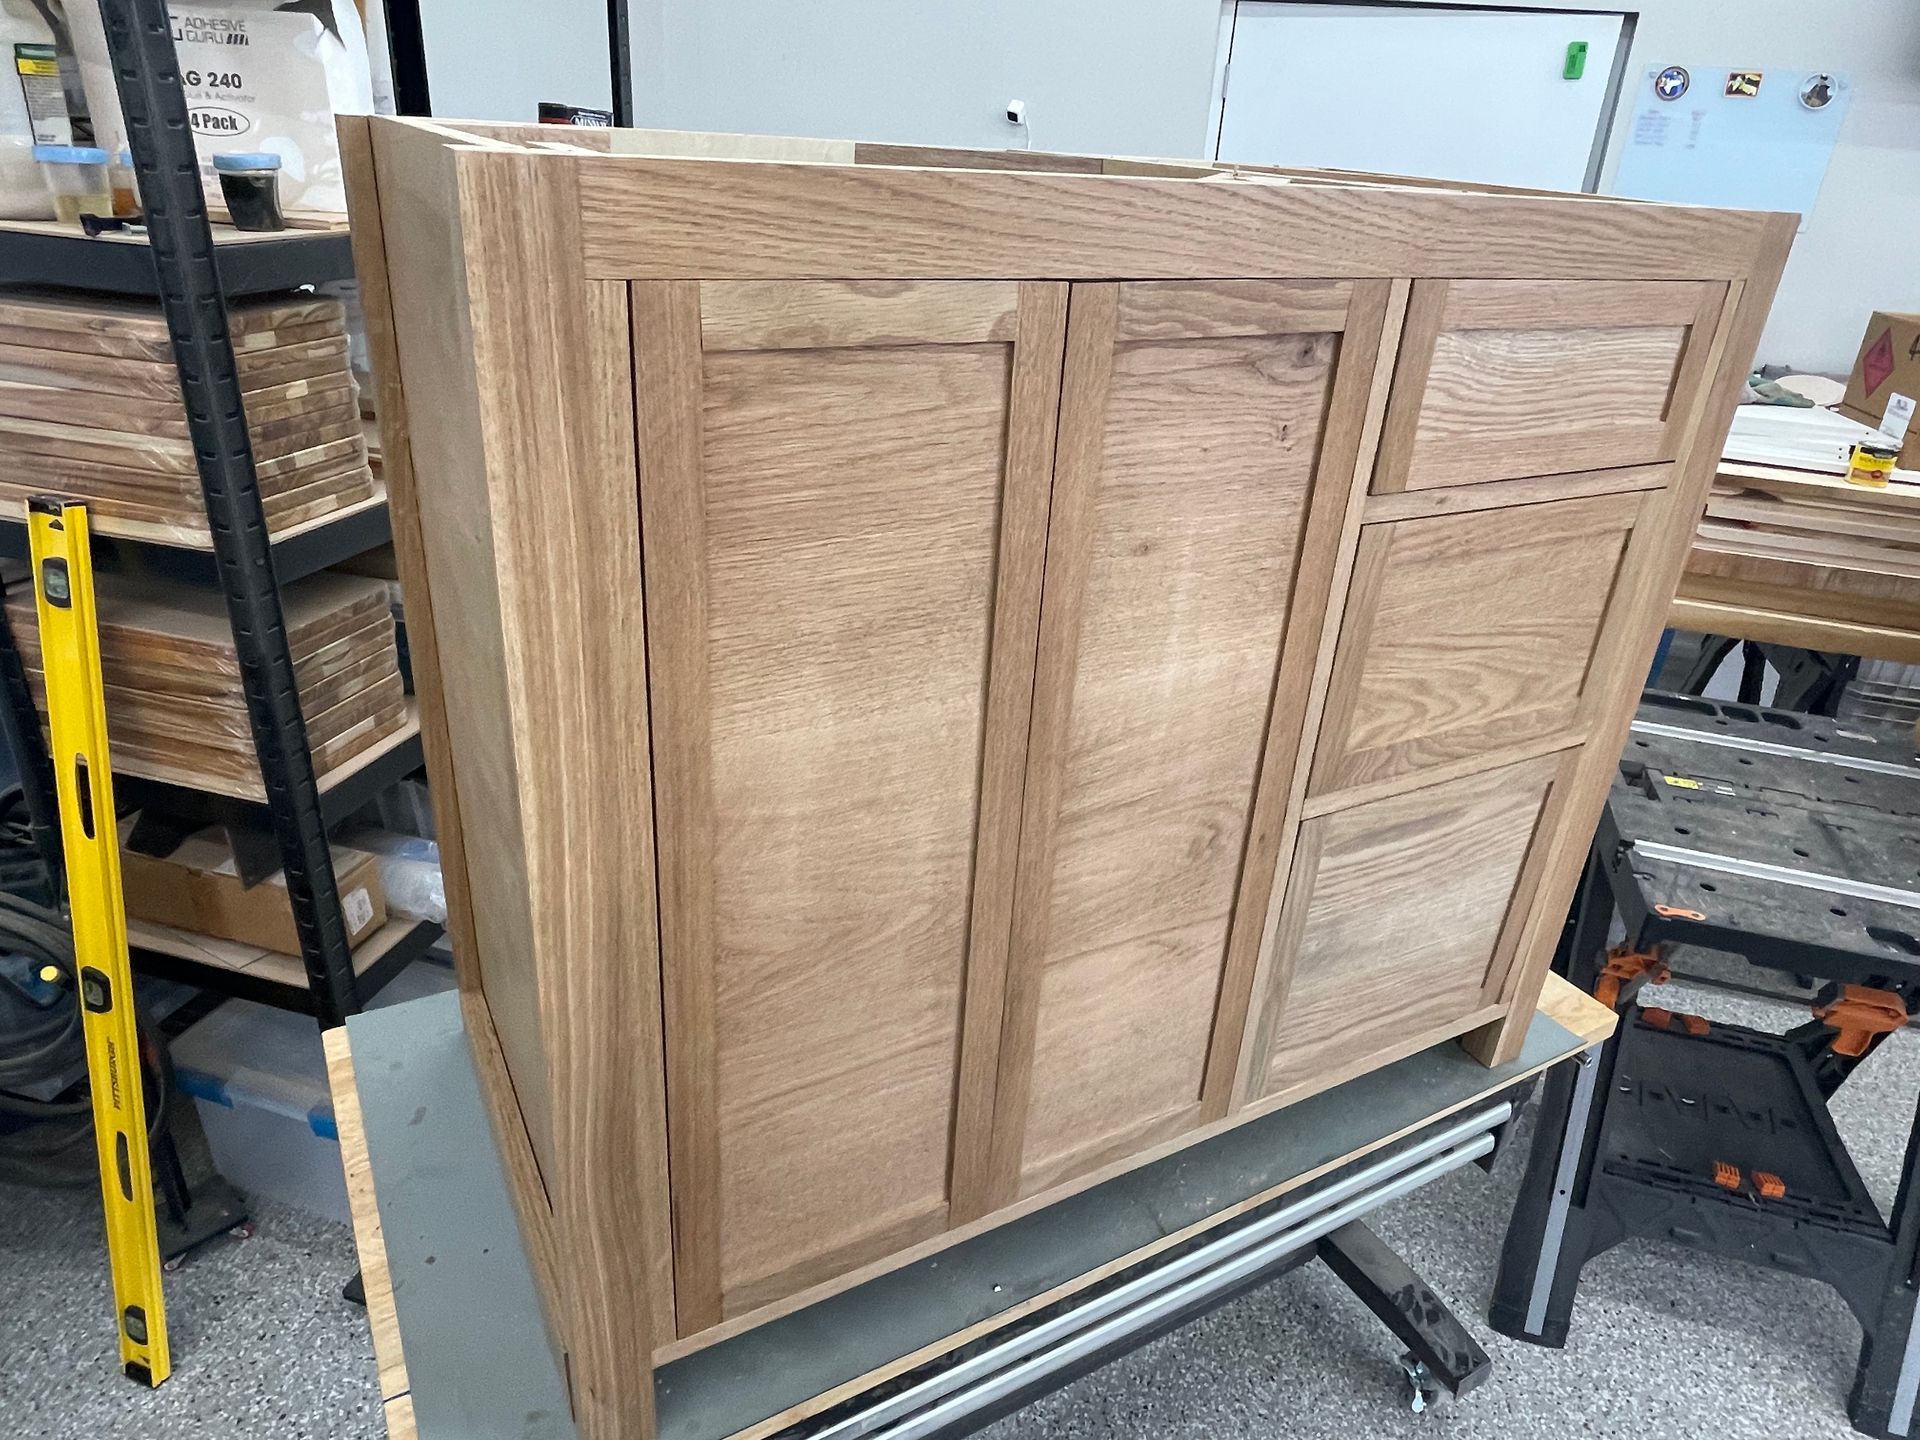 A wooden cabinet is sitting on top of a wooden table.